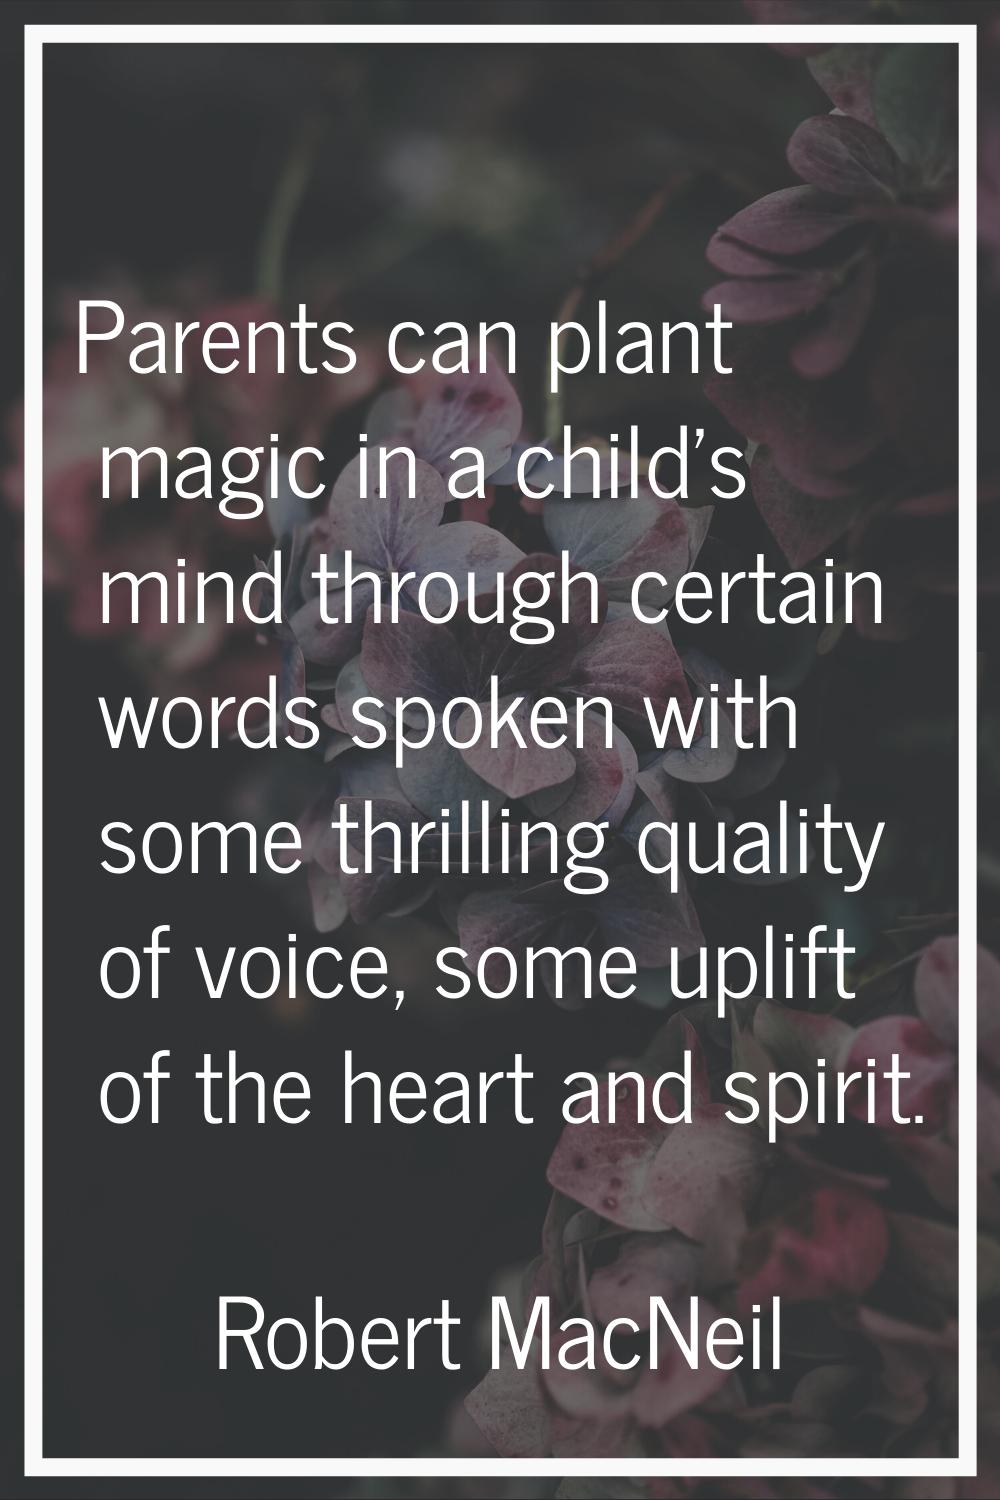 Parents can plant magic in a child's mind through certain words spoken with some thrilling quality 